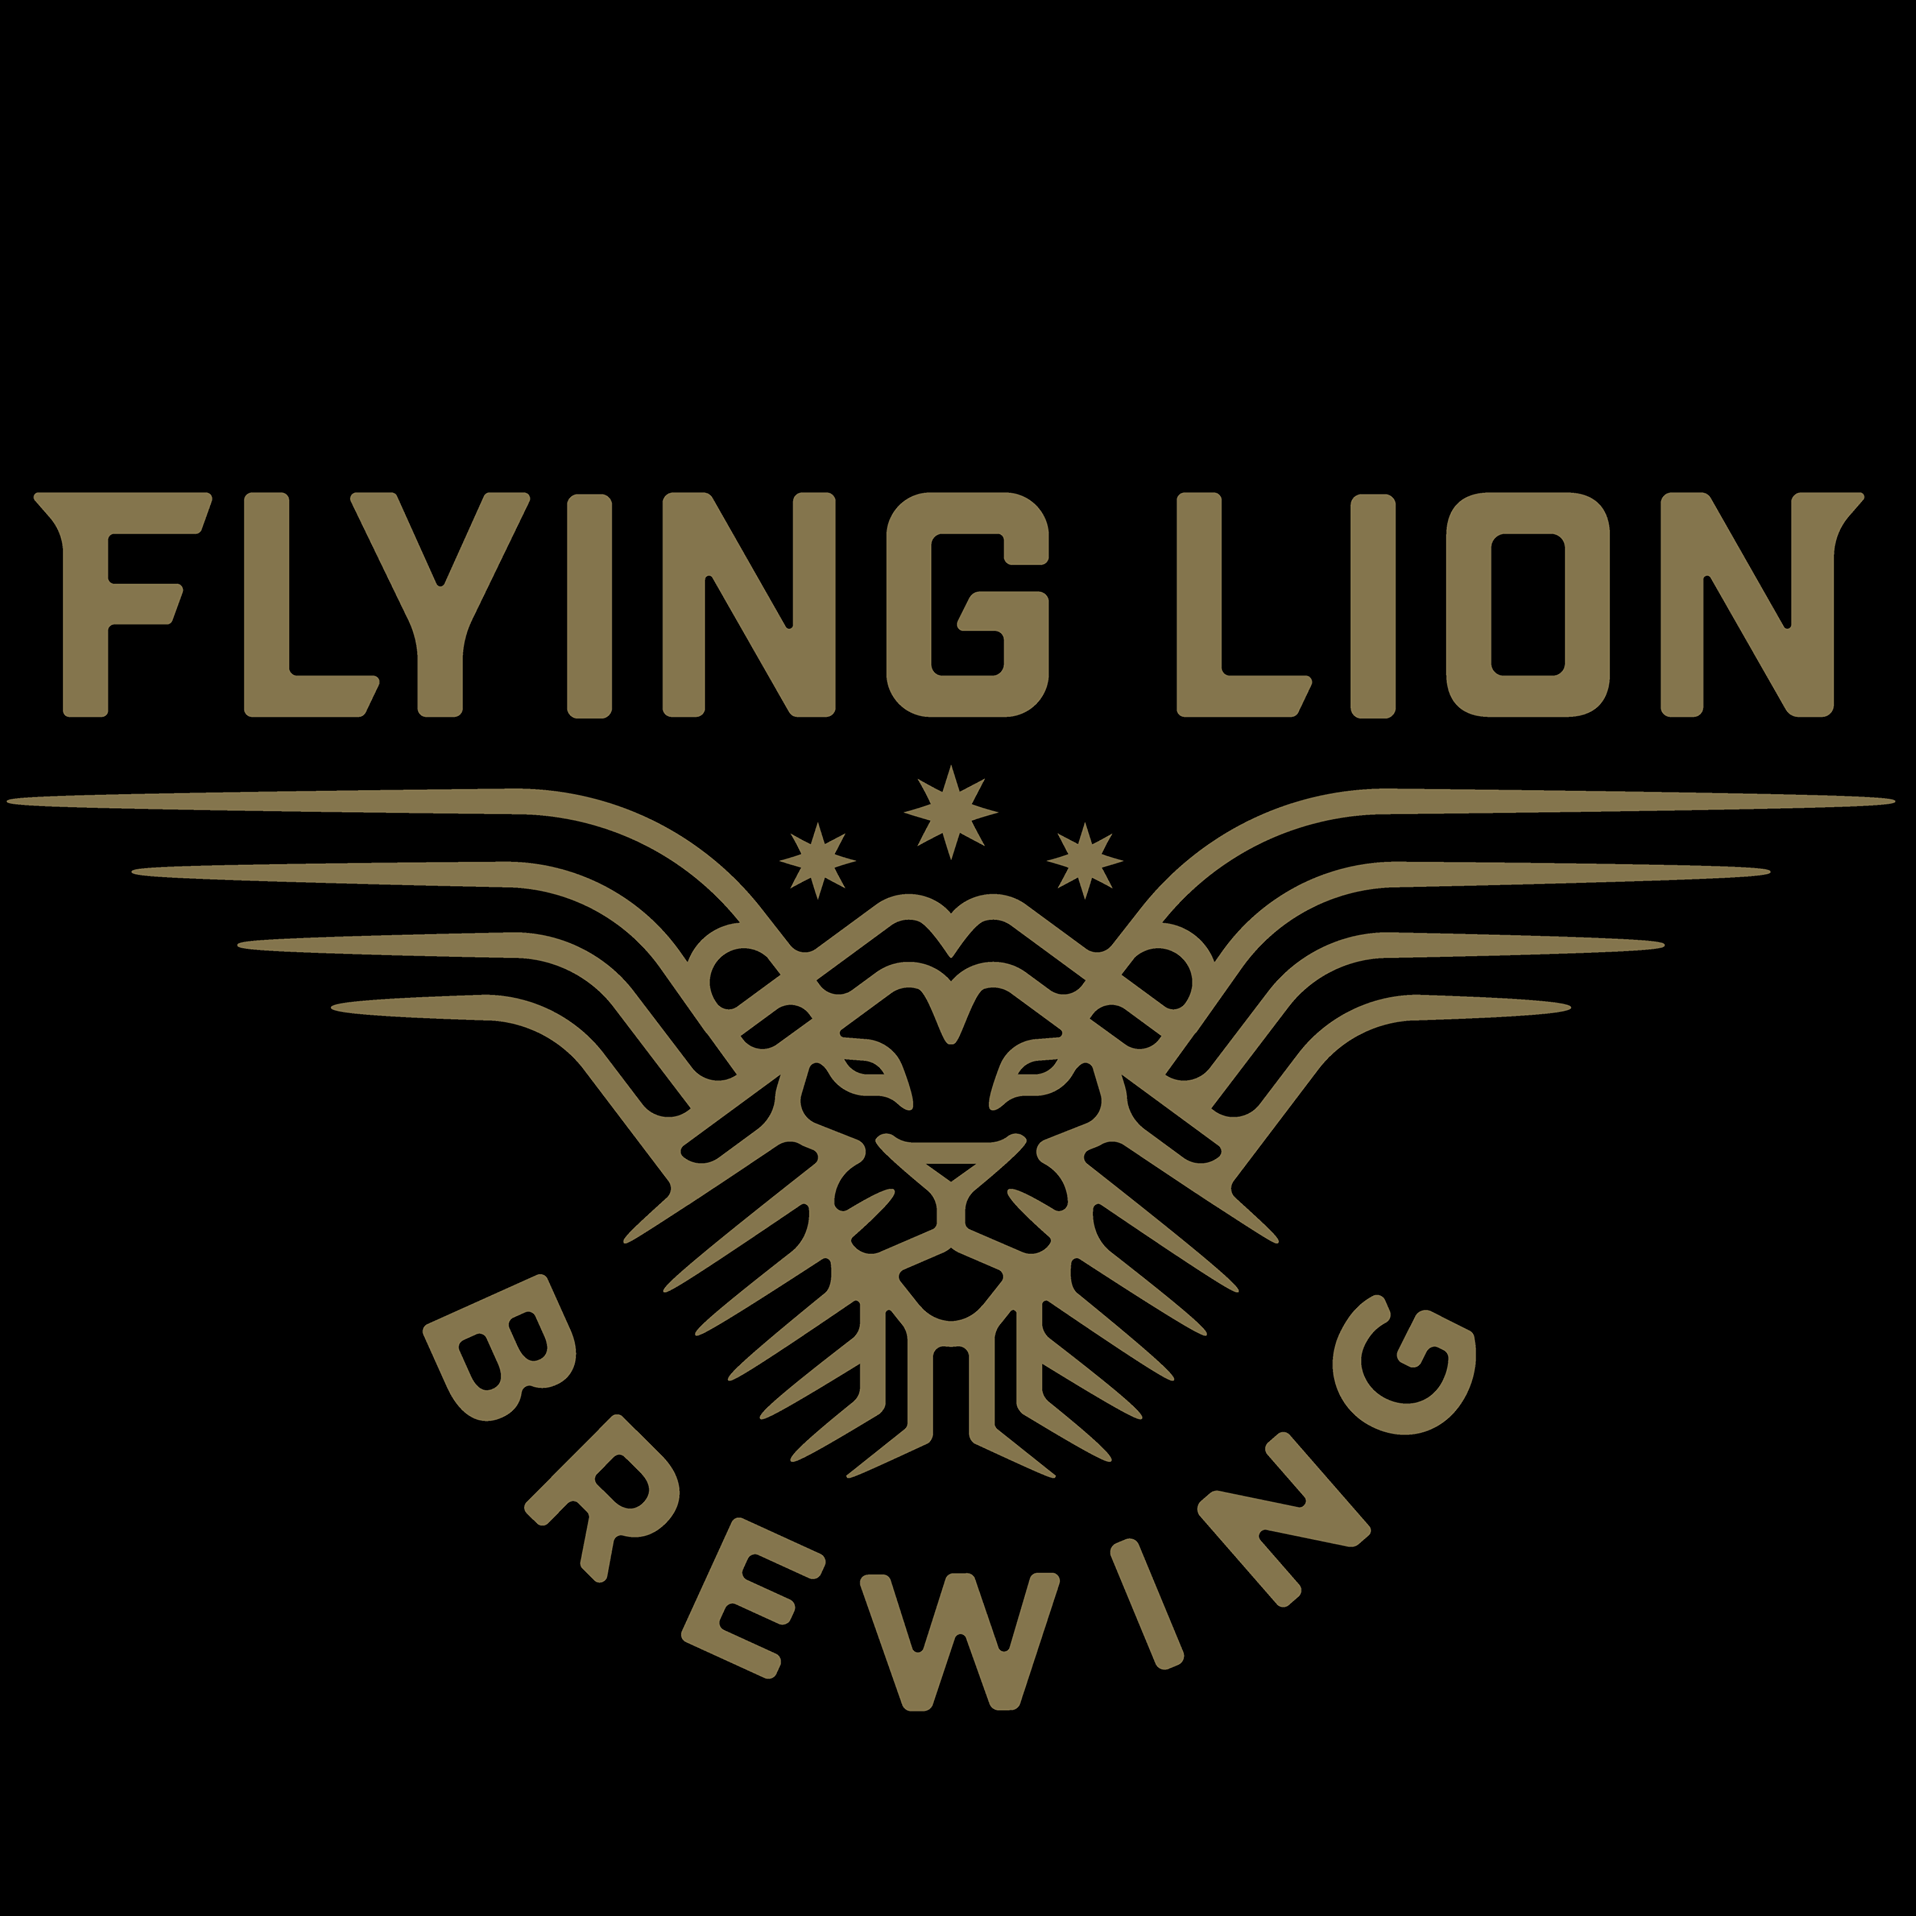 Business logo of Flying Lion Brewing